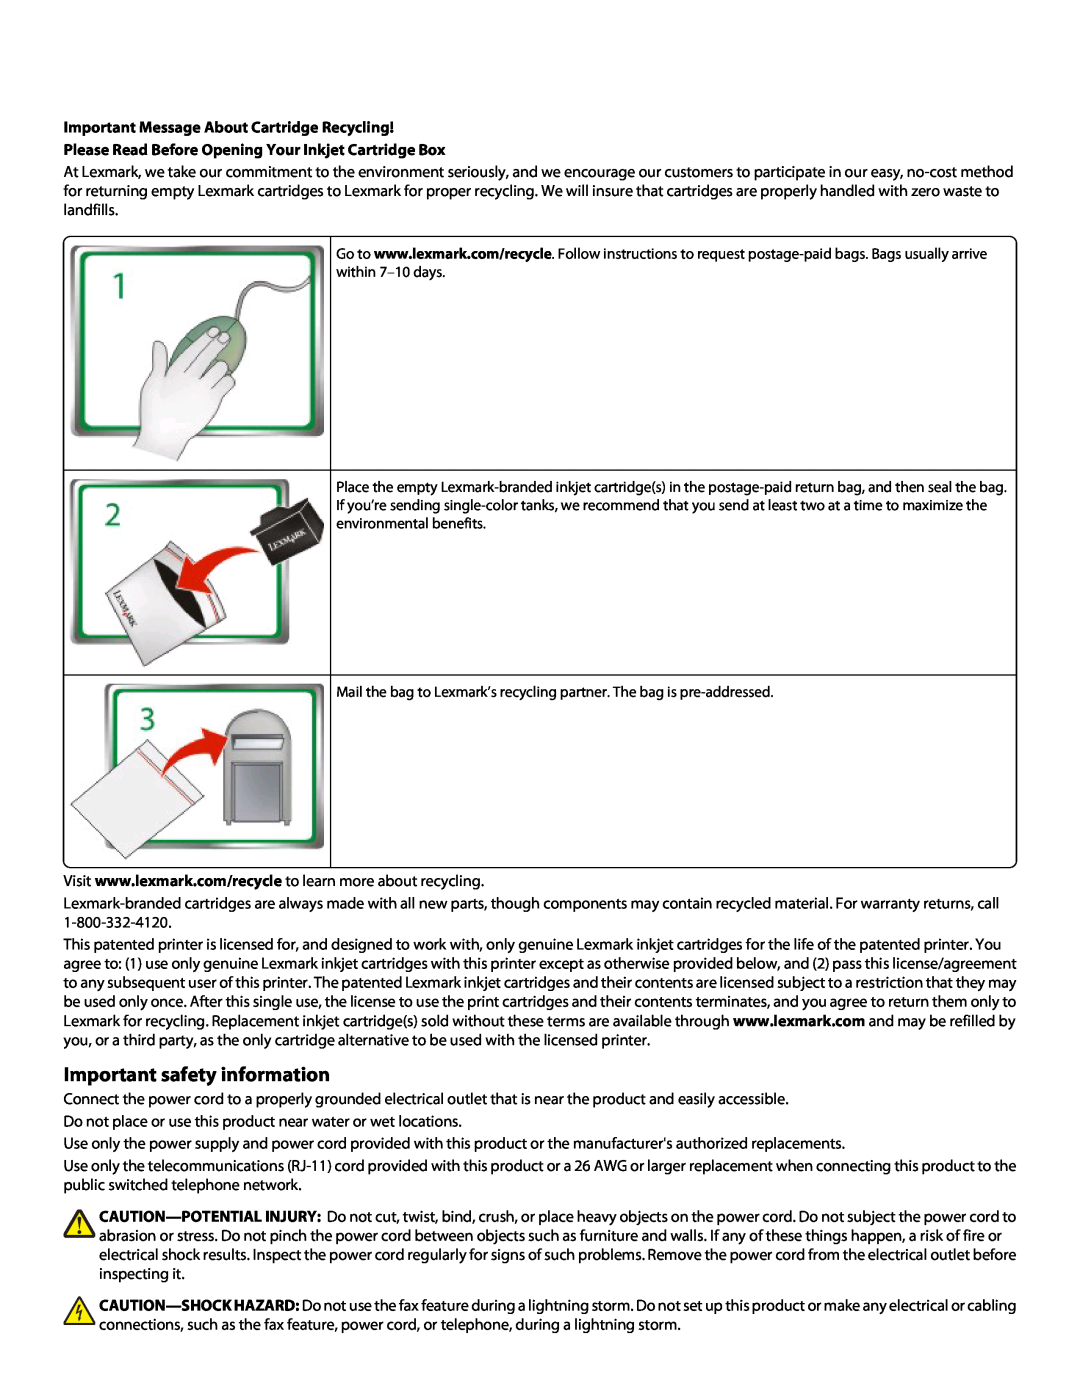 Lexmark Pro207, Pro208, Pro205 manual Important safety information, Important Message About Cartridge Recycling 